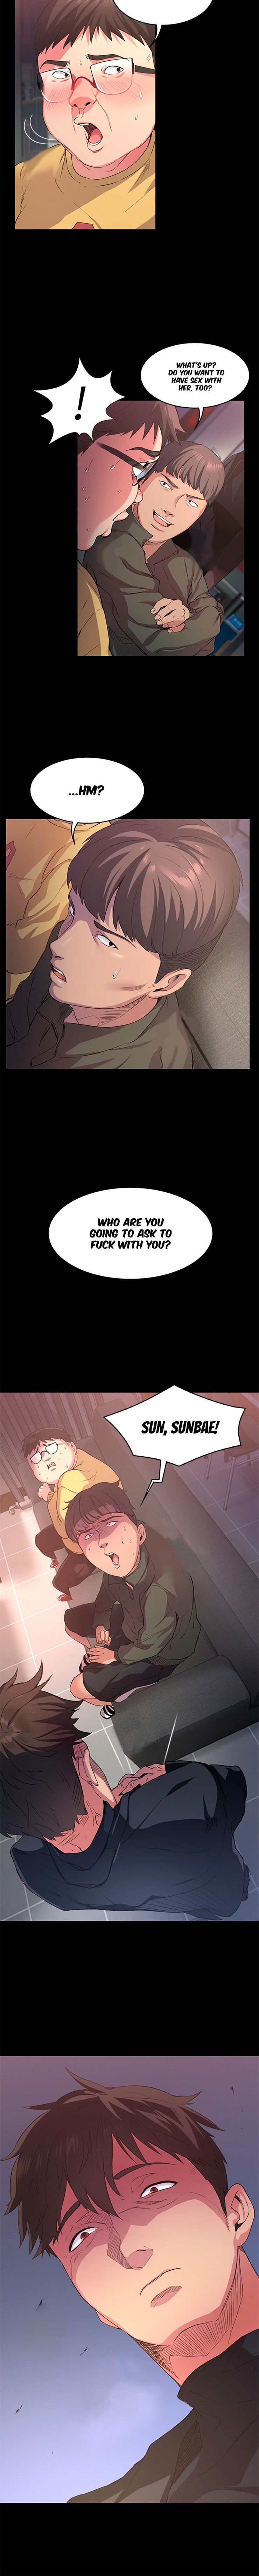 Returning Girlfriend - Chapter 1 Page 16